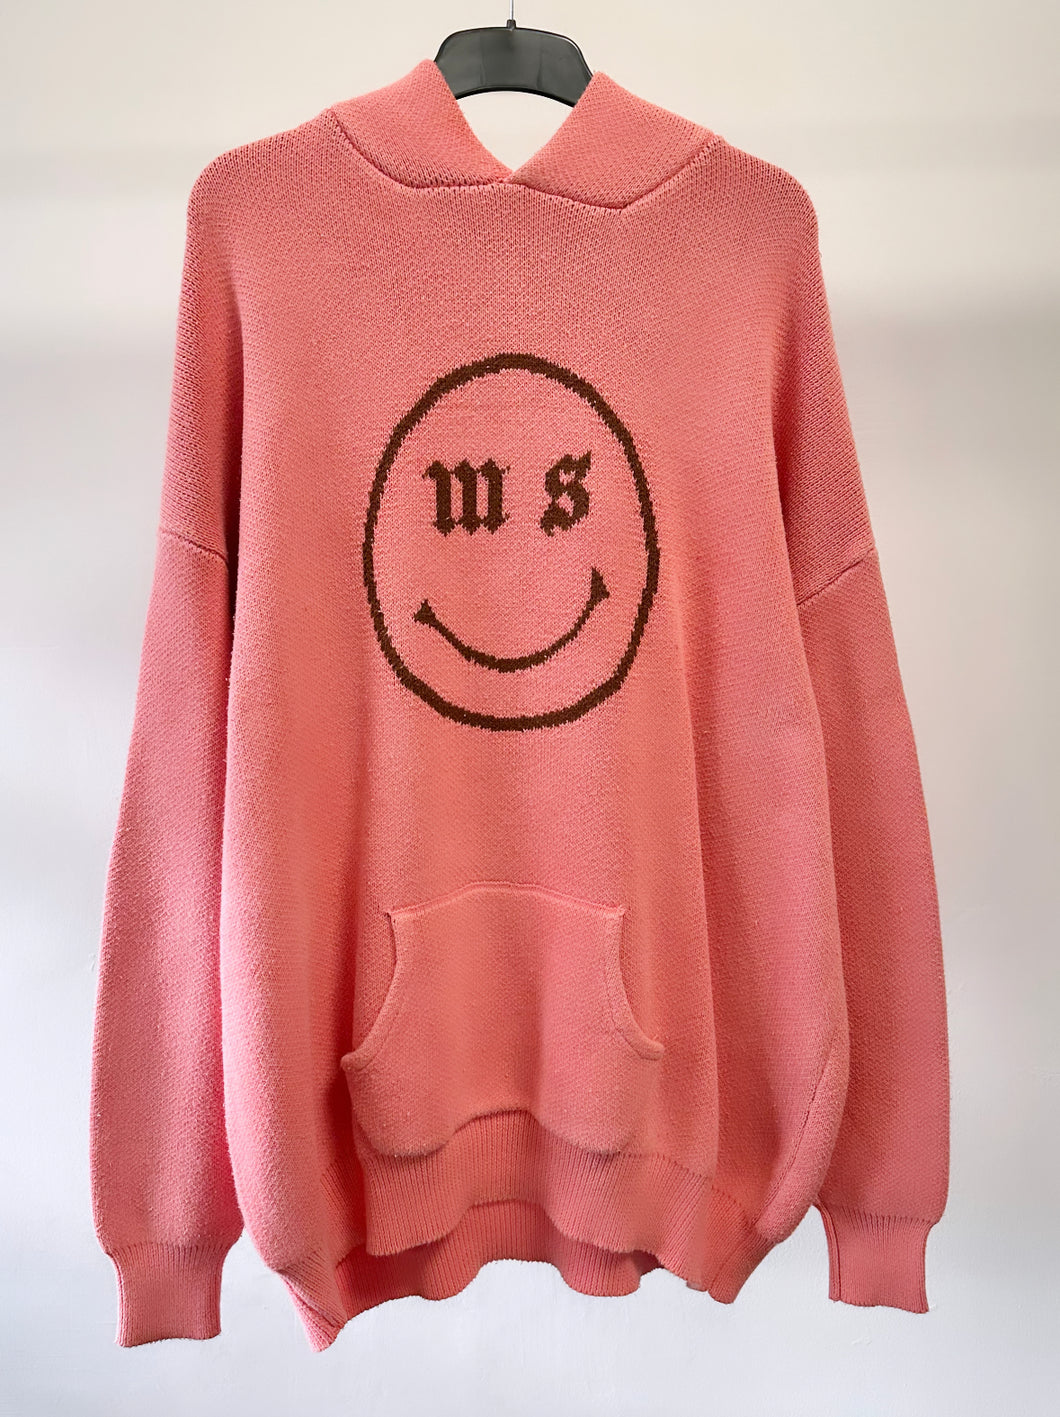 Washed Peach Smiley Knit.